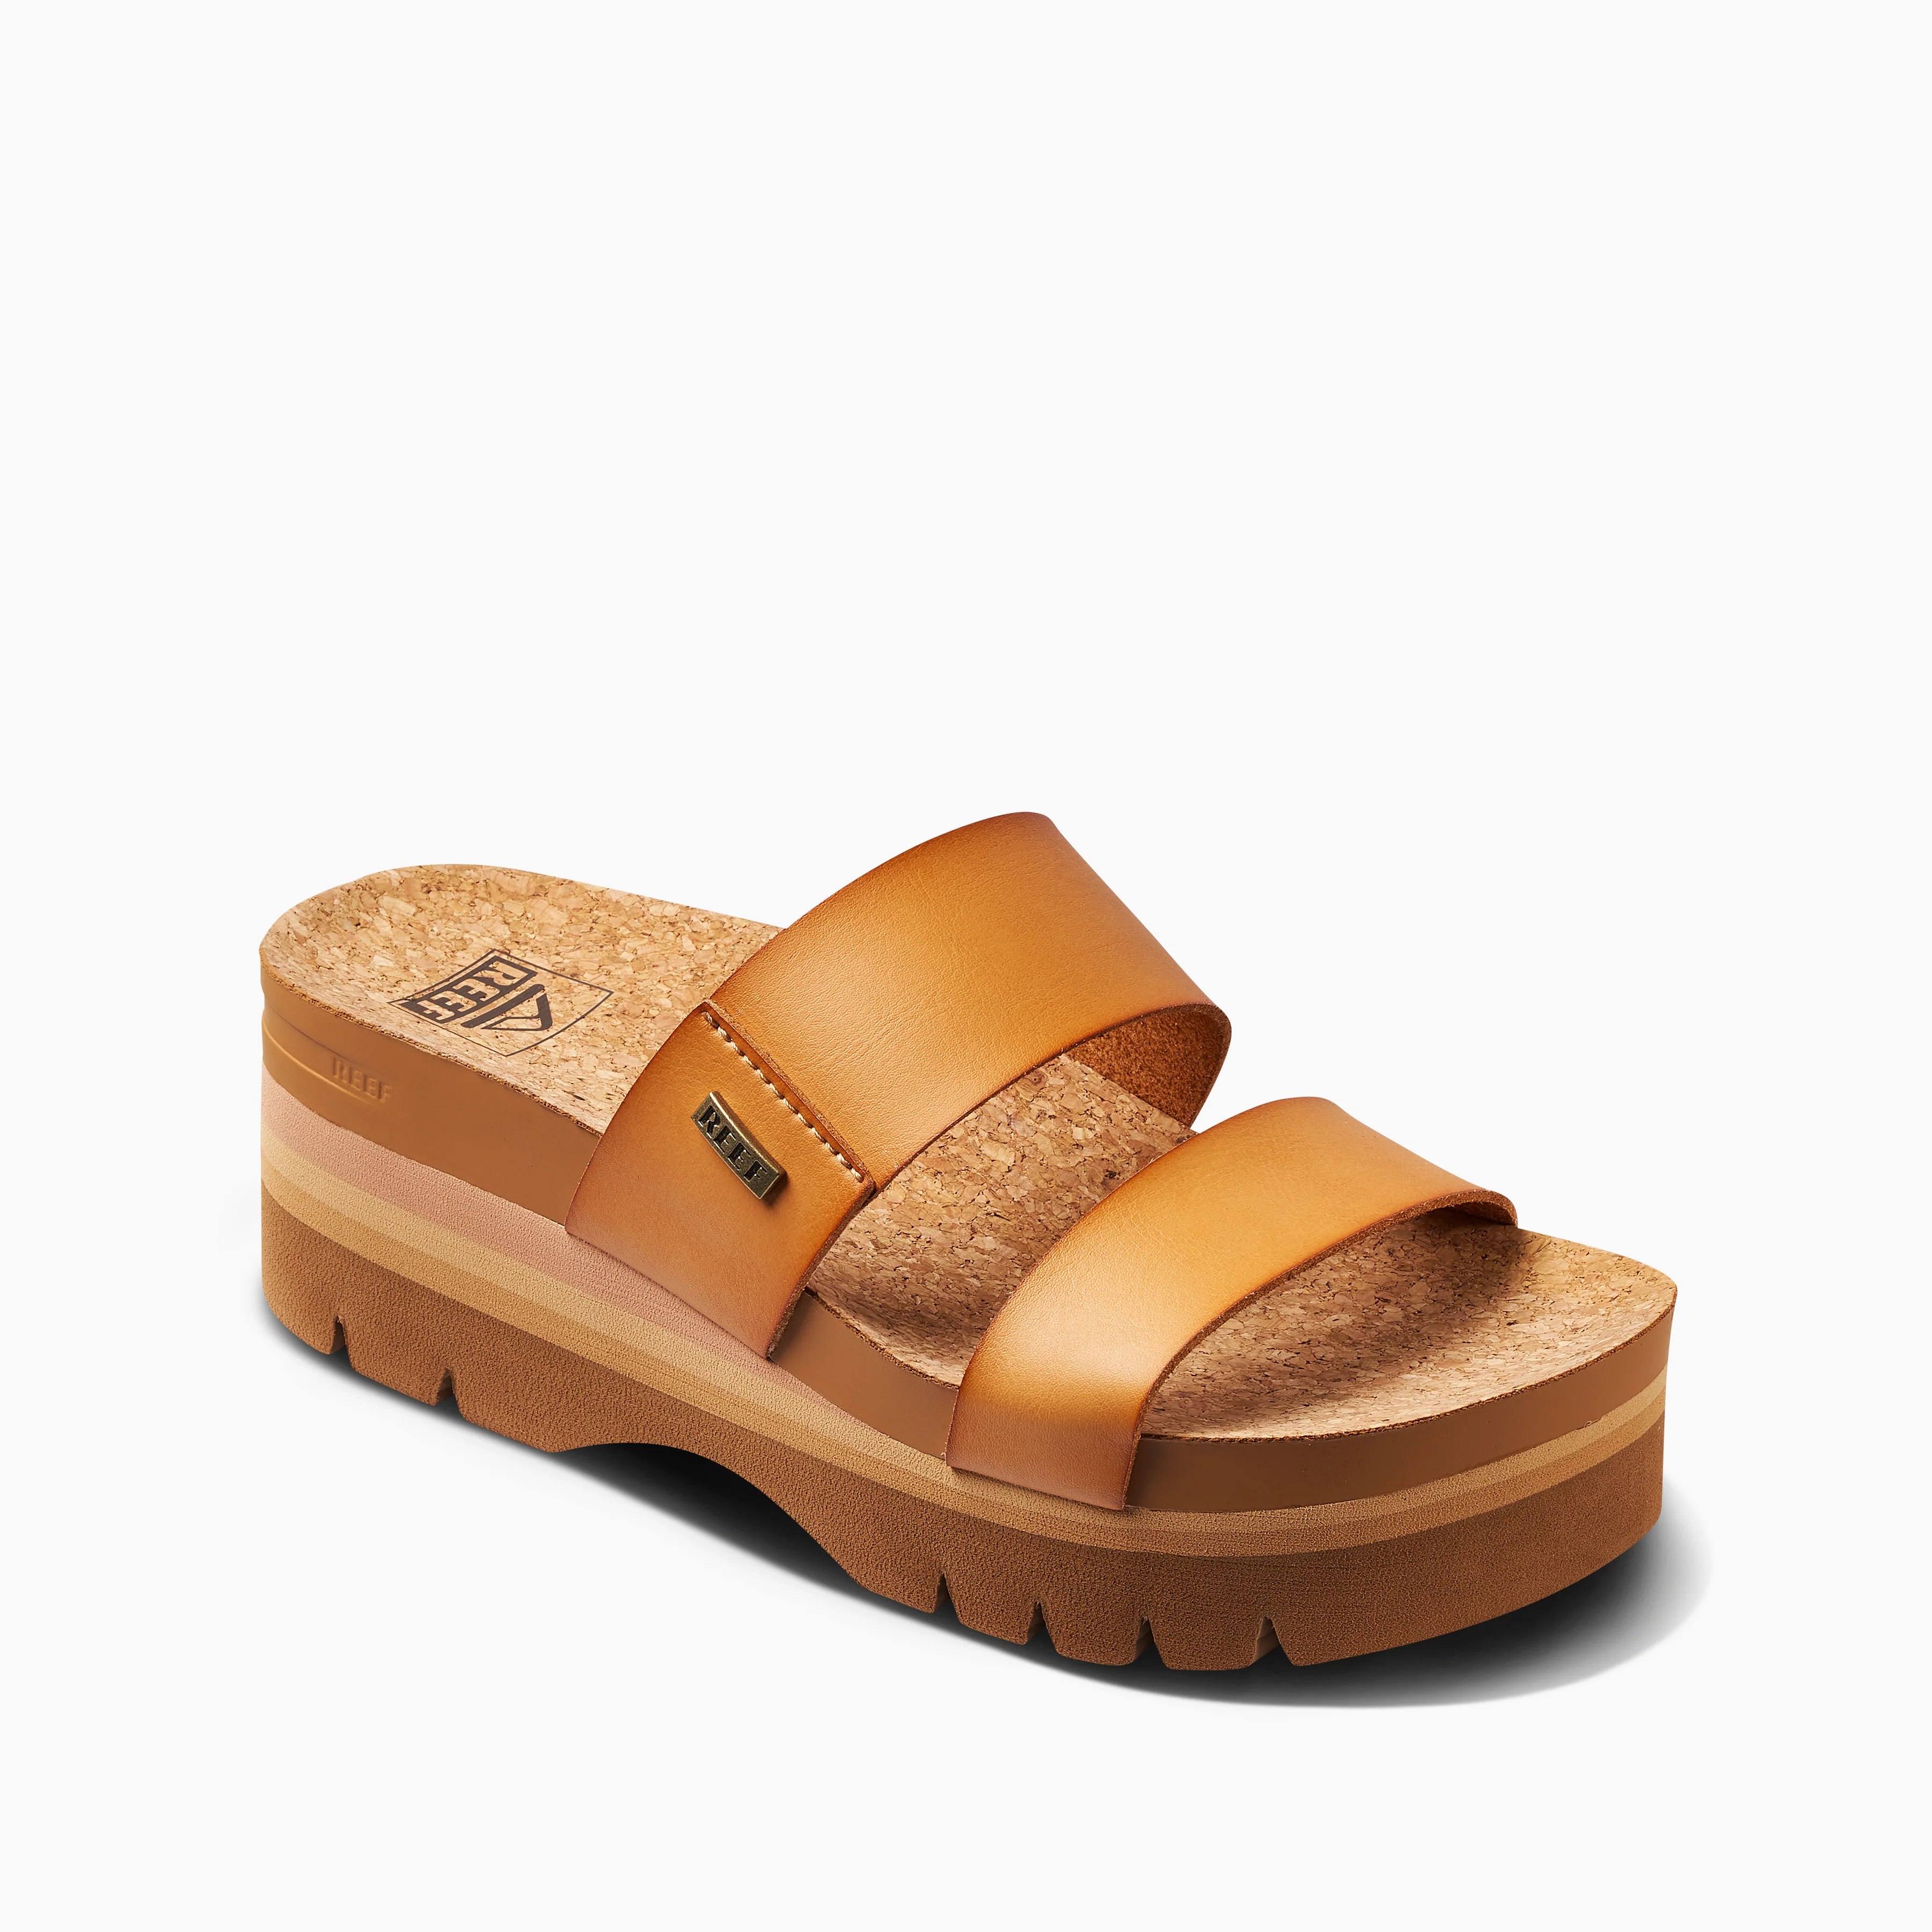 Cushion Vista Higher Platform Sandals in Natural angle view